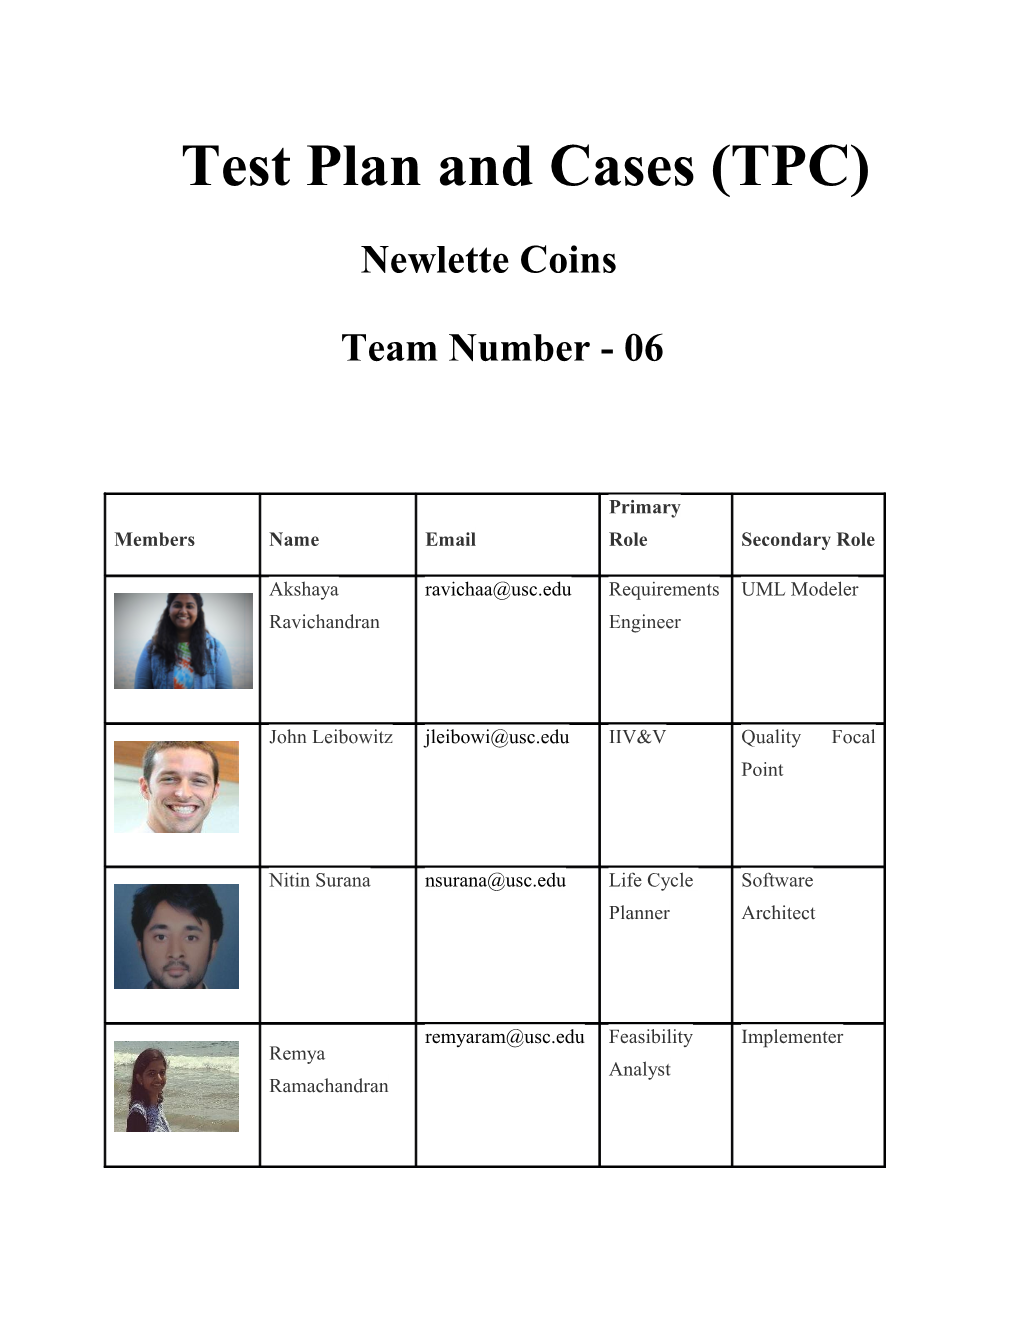 Test Plan and Cases (TPC) s2